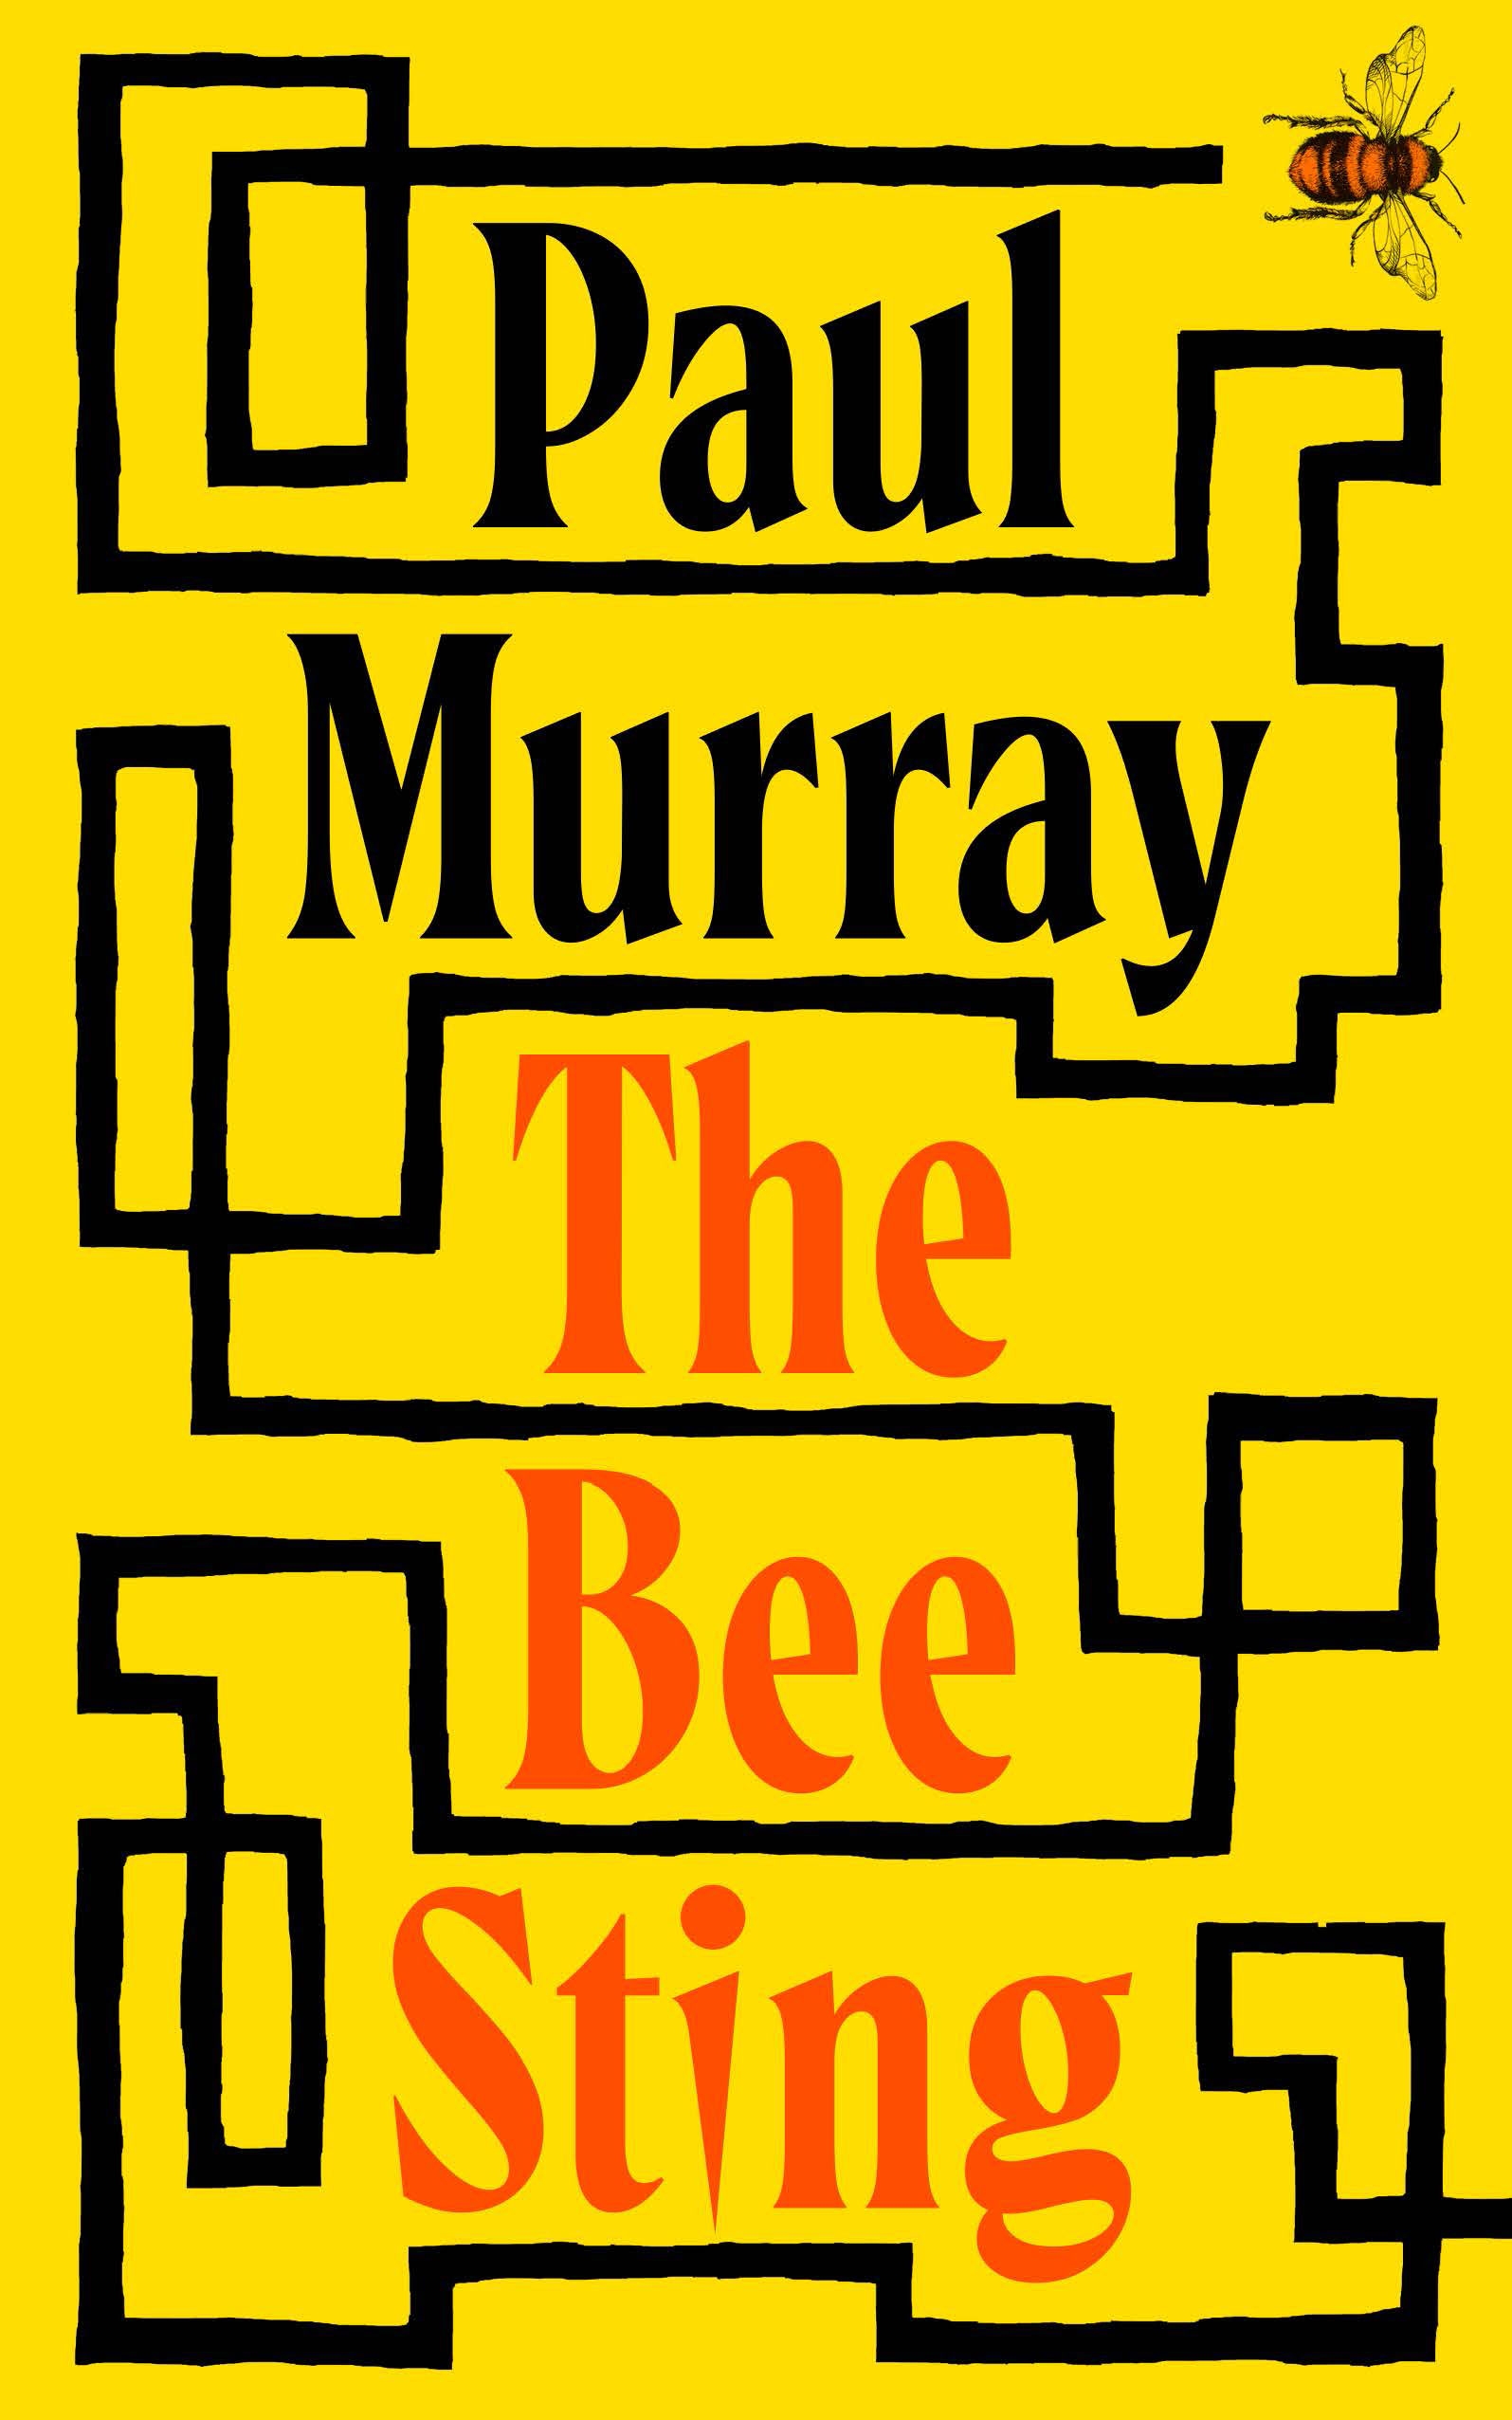 'The Bee Sting' by Paul Murray book cover. Image: The Booker Prize 